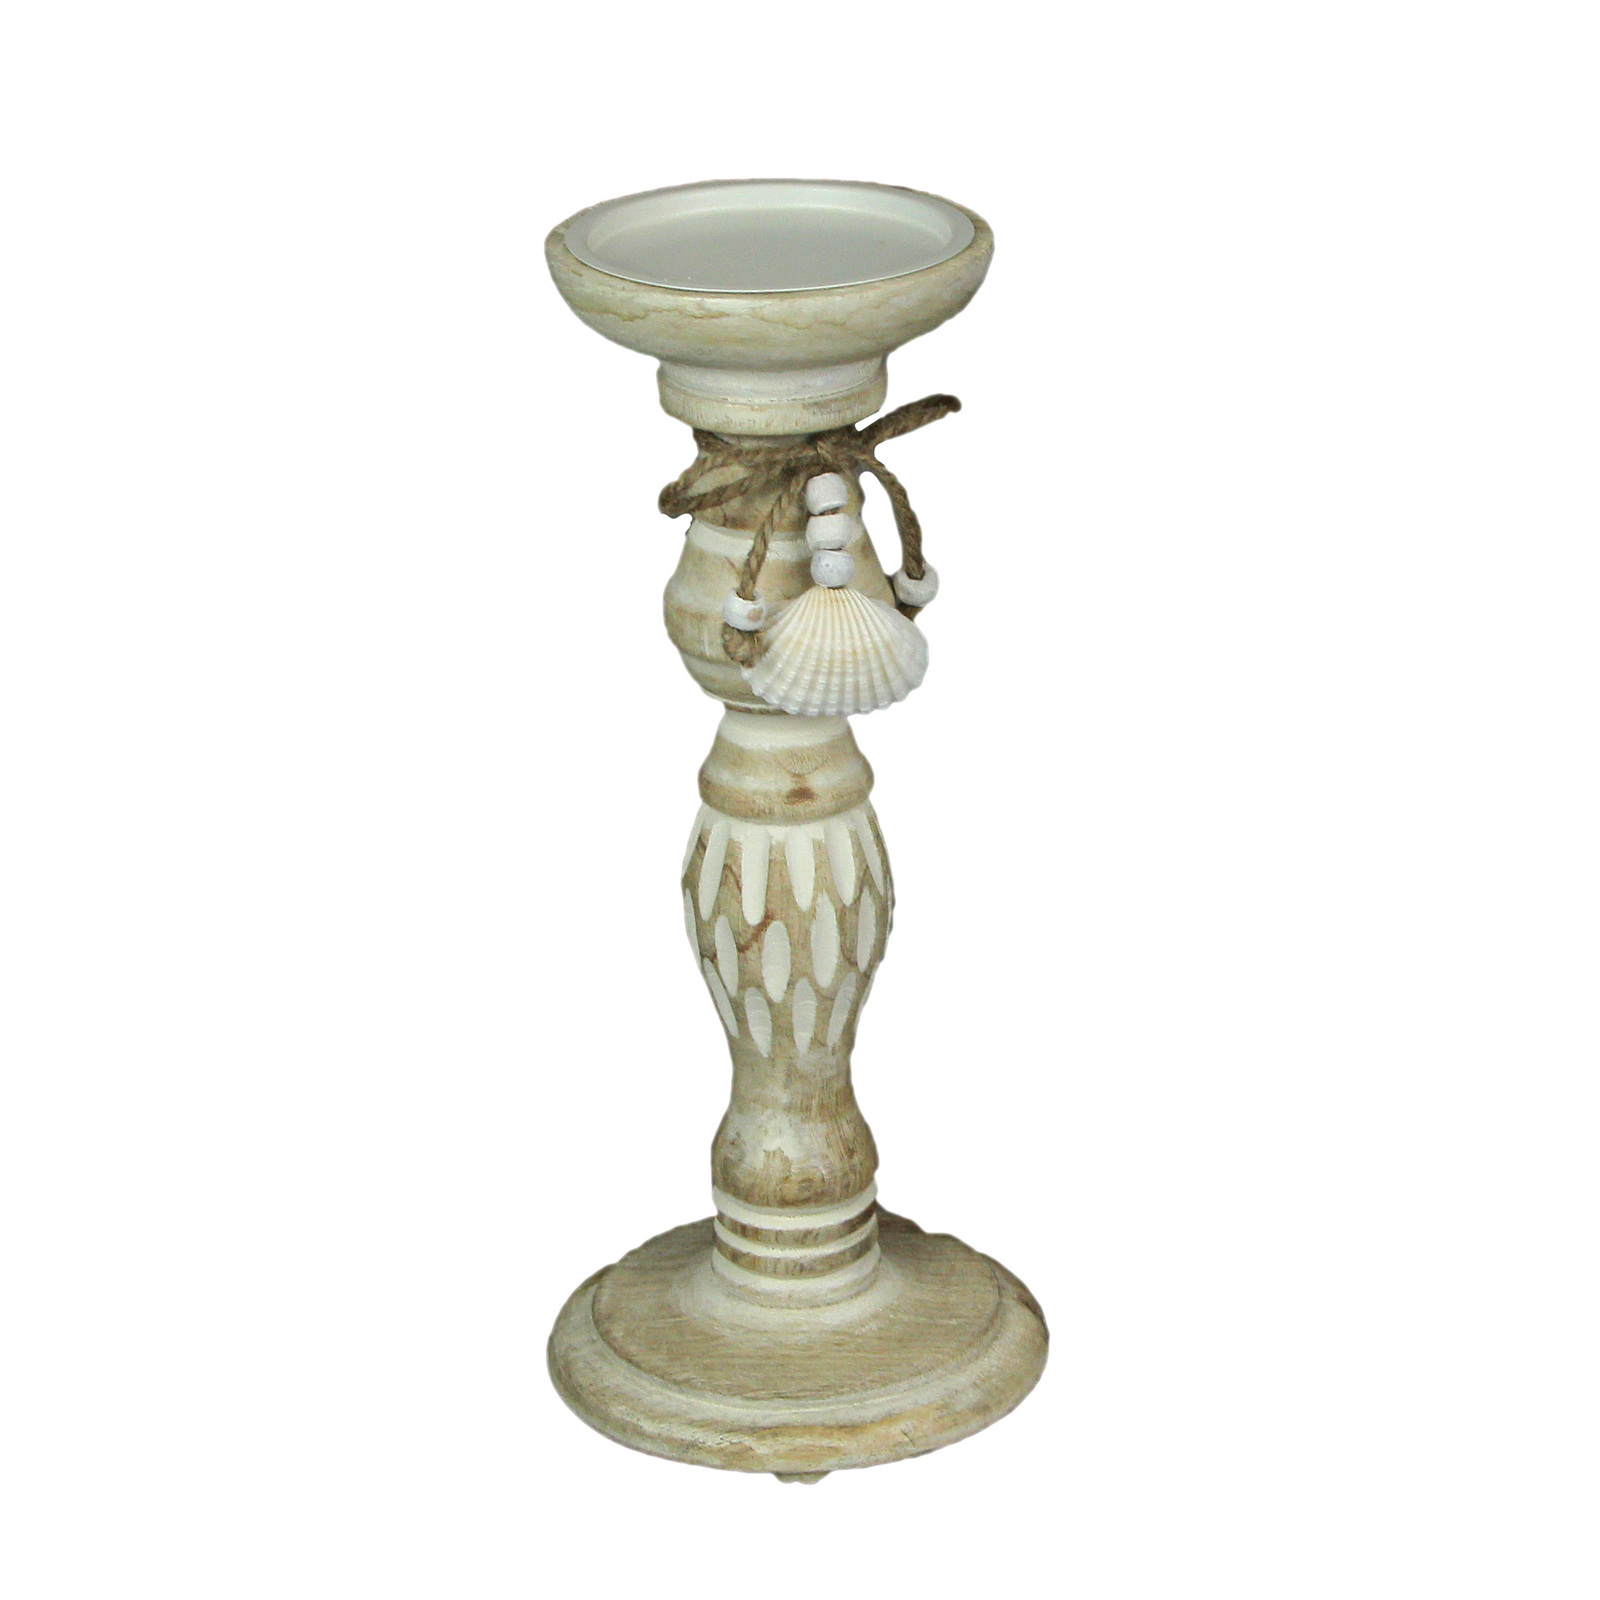 11 Inch Wood Pedestal Candle Holder Rustic White Washed Pillar With Sea Shells - $24.13